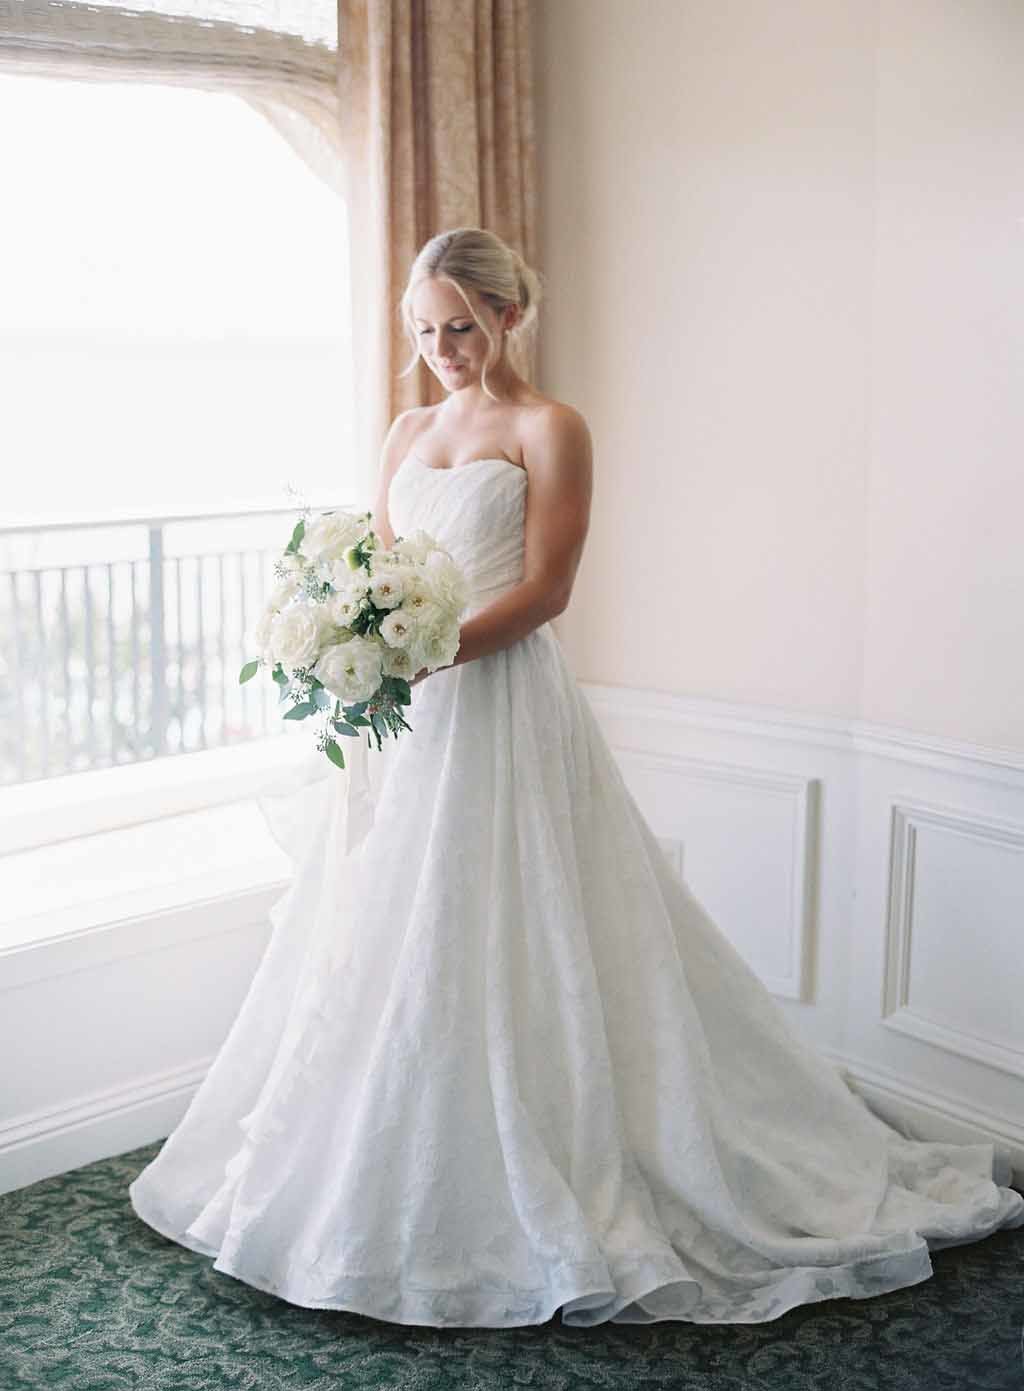 bride in long white trailing dress holding white bridal bouquet